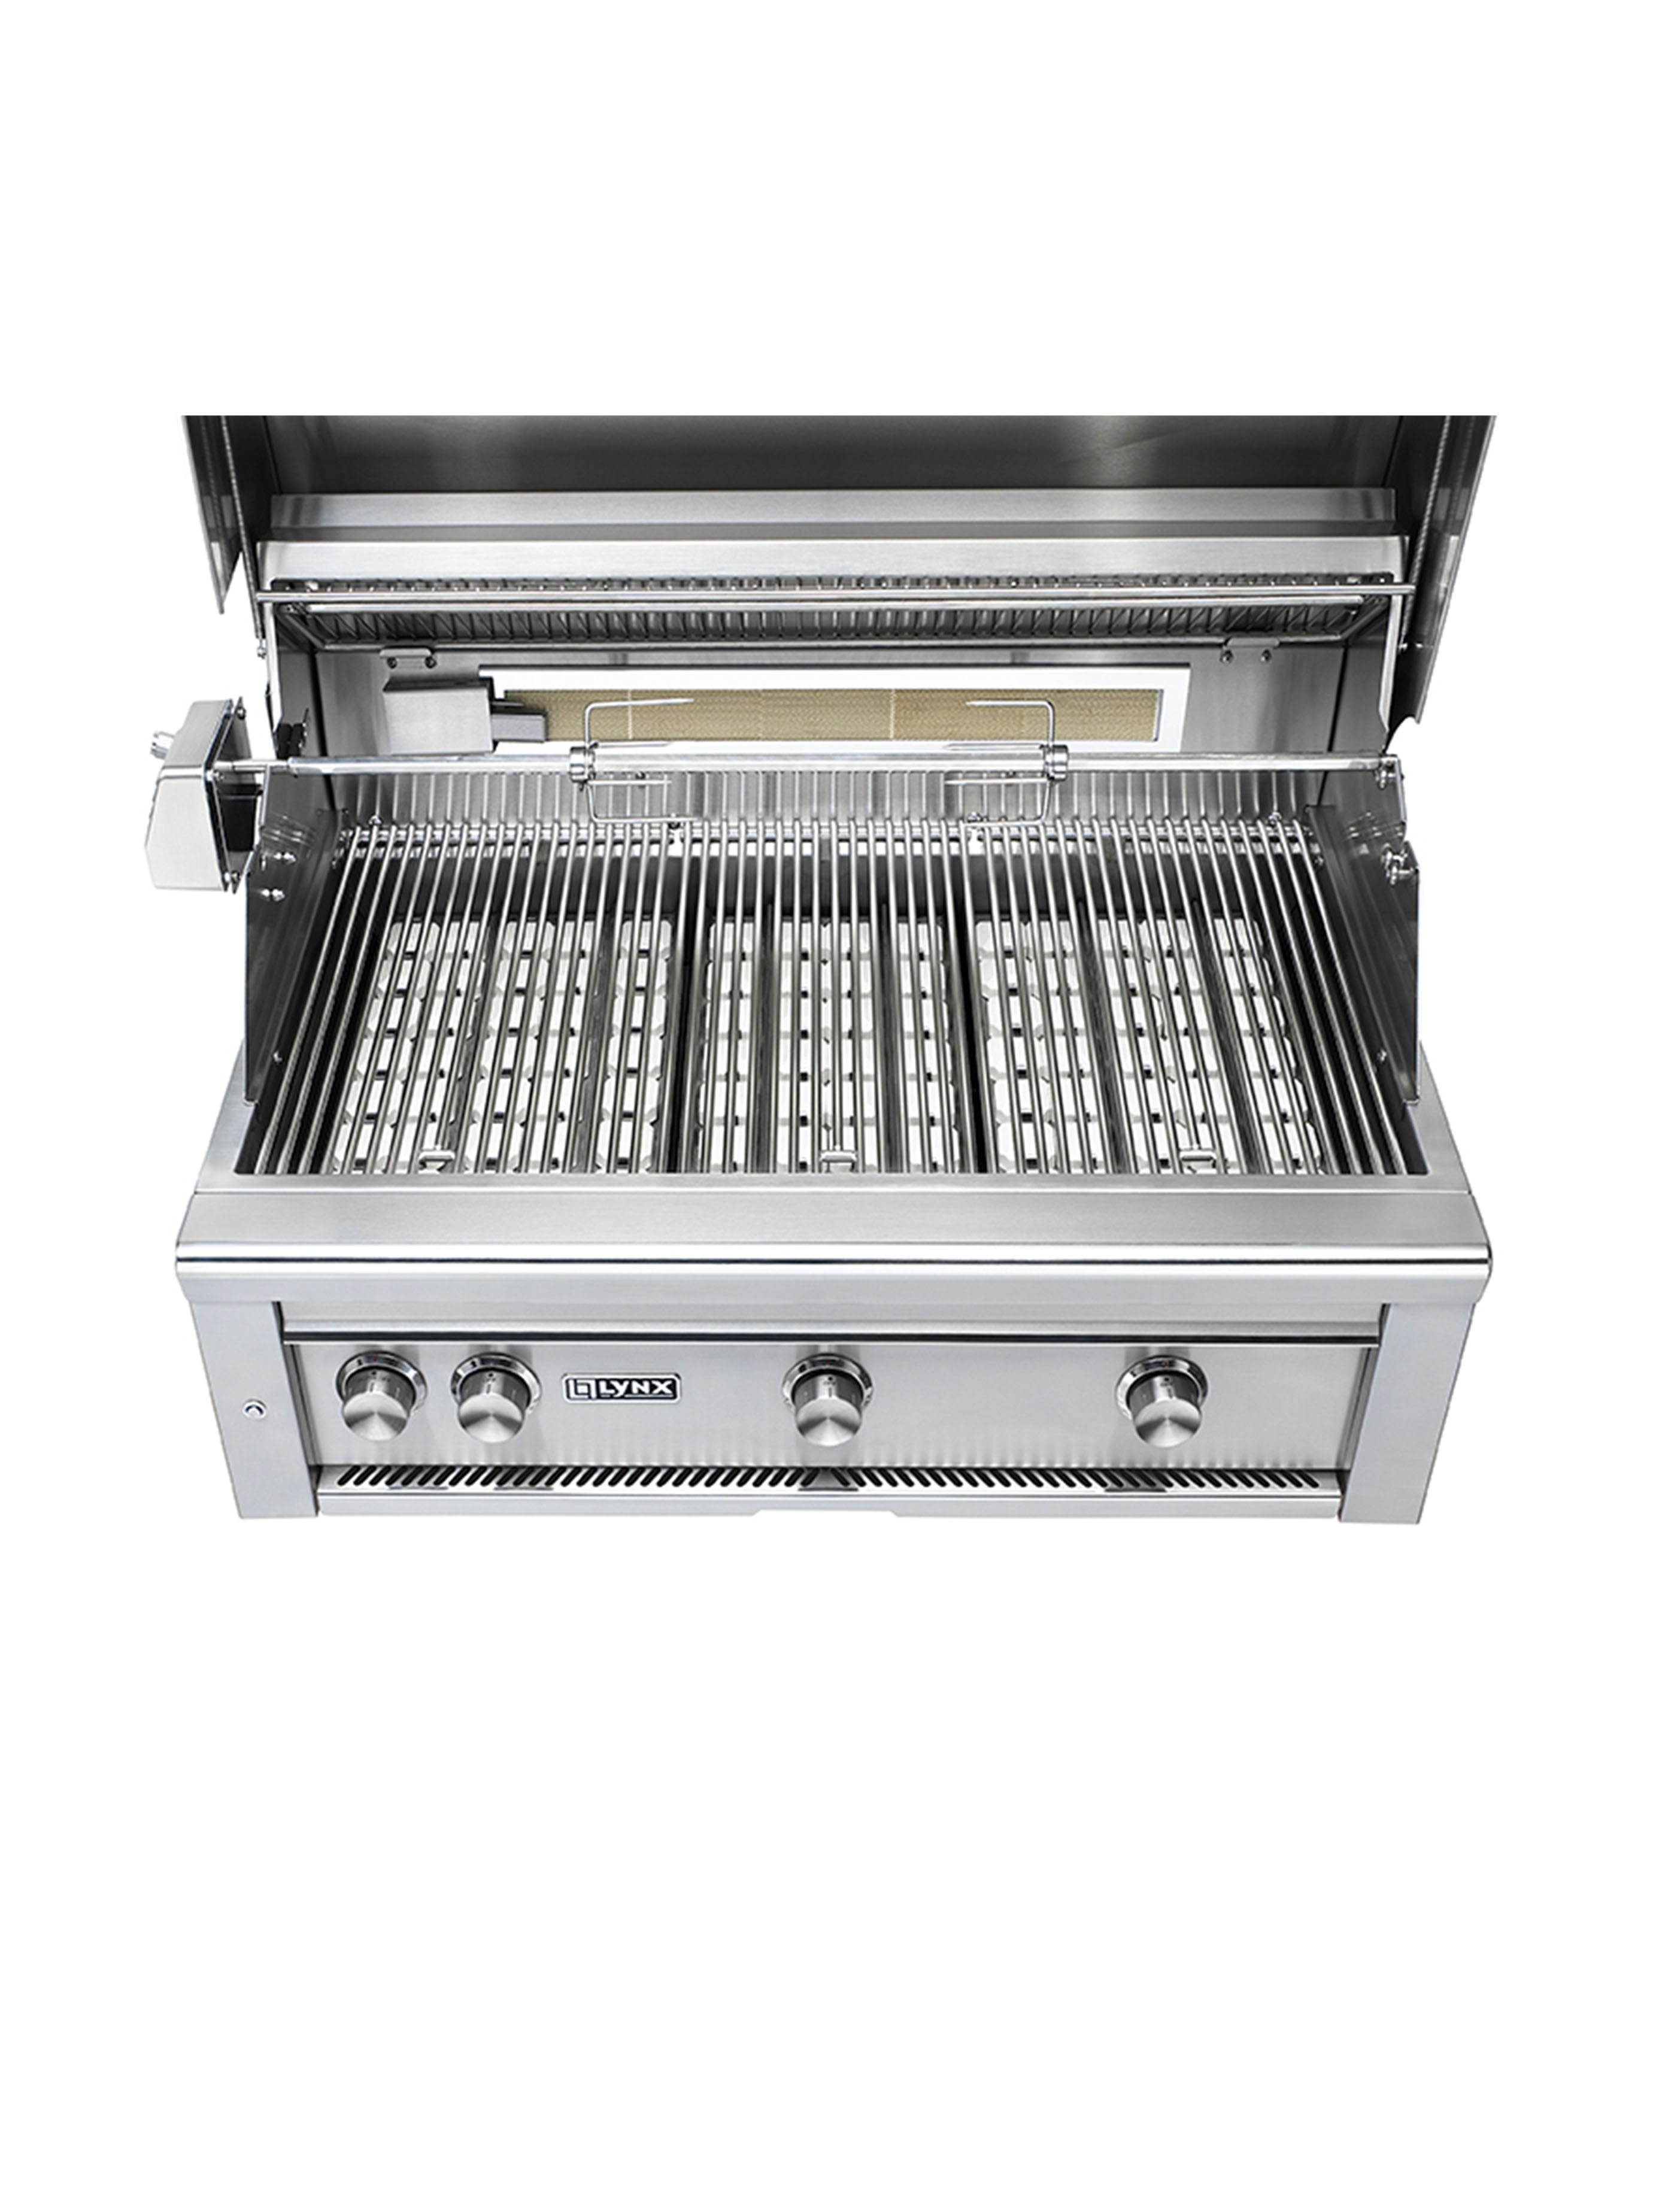 Detail Lynx 36 Professional Grill Nomer 19